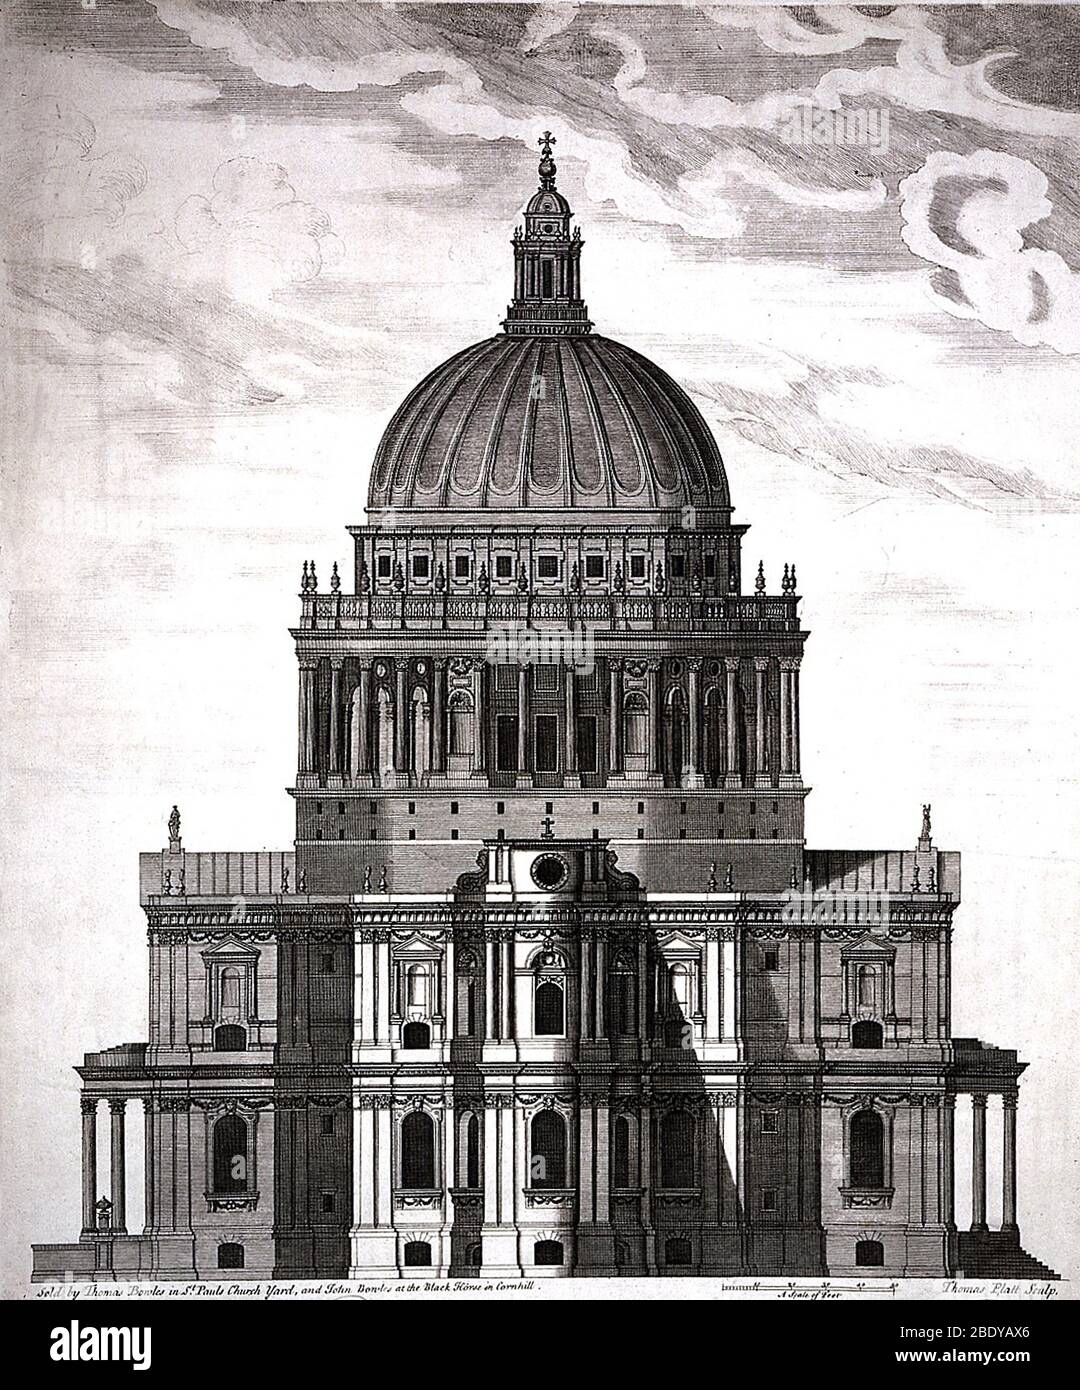 St. Paul's Drawn By Christopher Wren Stock Photo